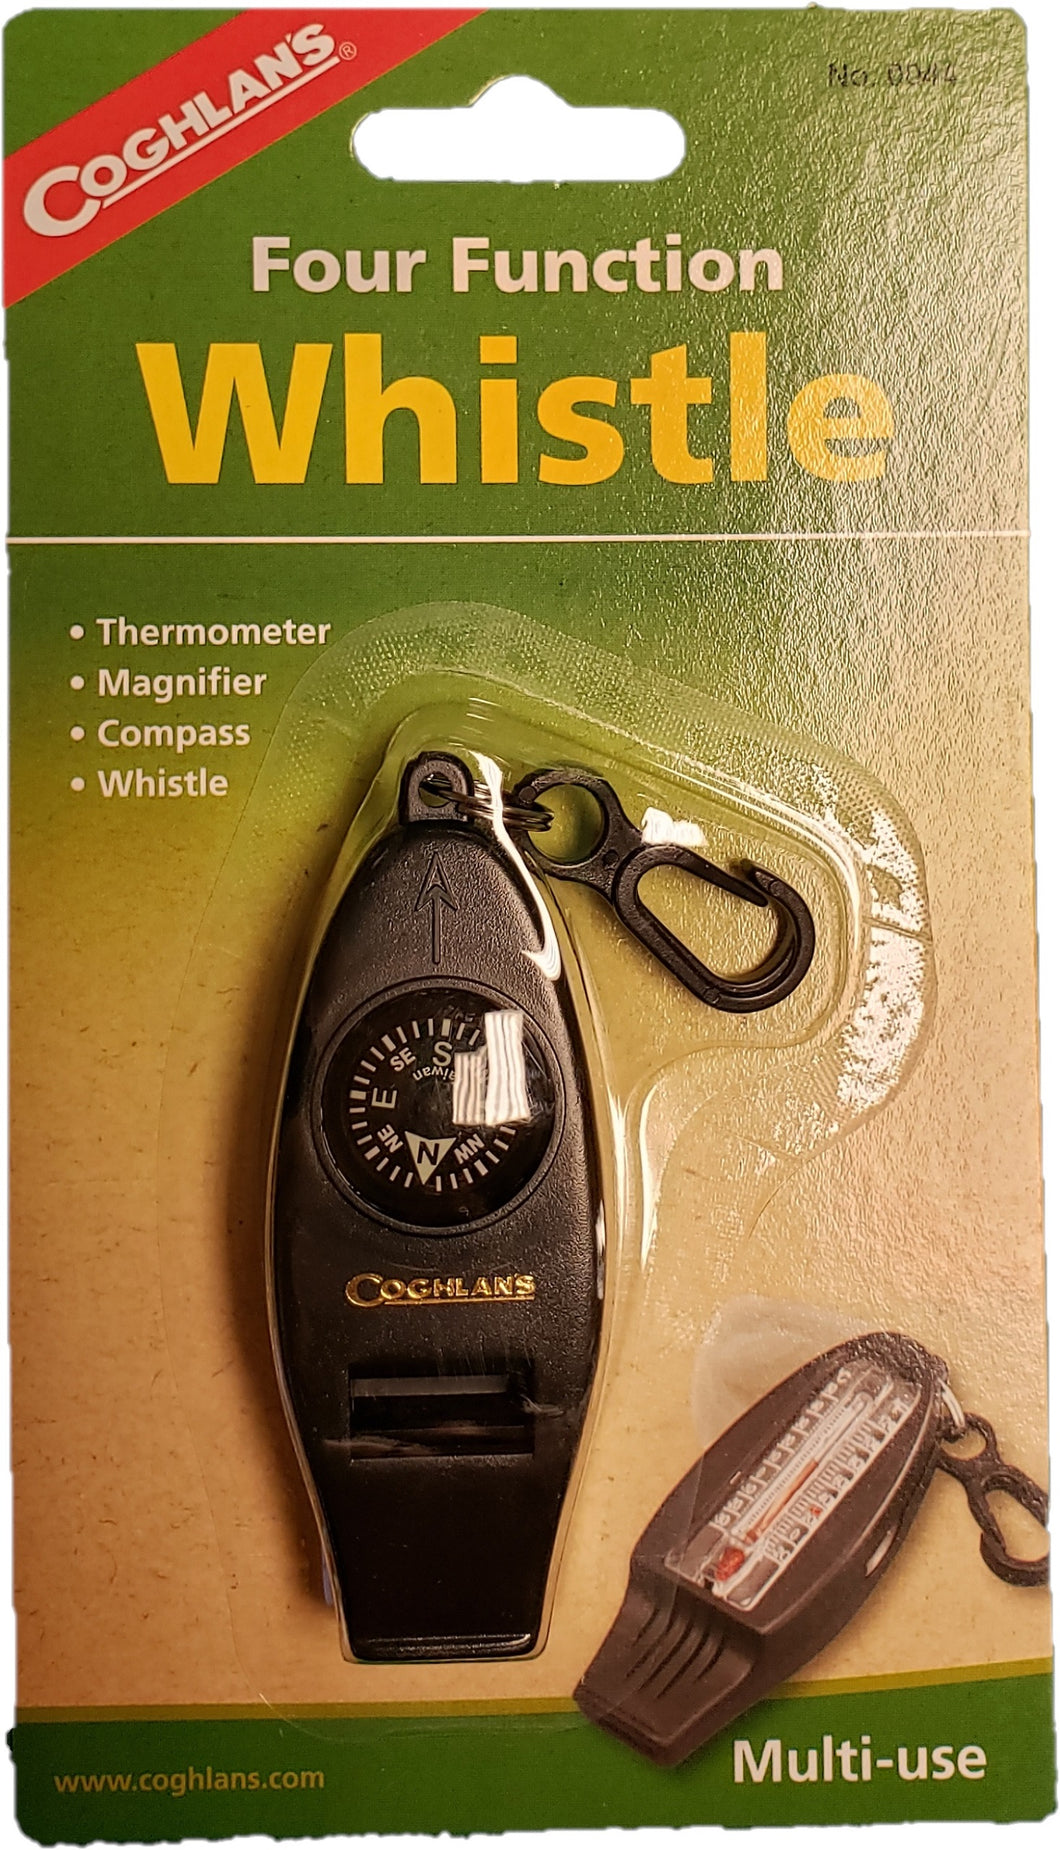 Coghlan's Four Function Whistle Thermometer Magnifier Compass 4-Function